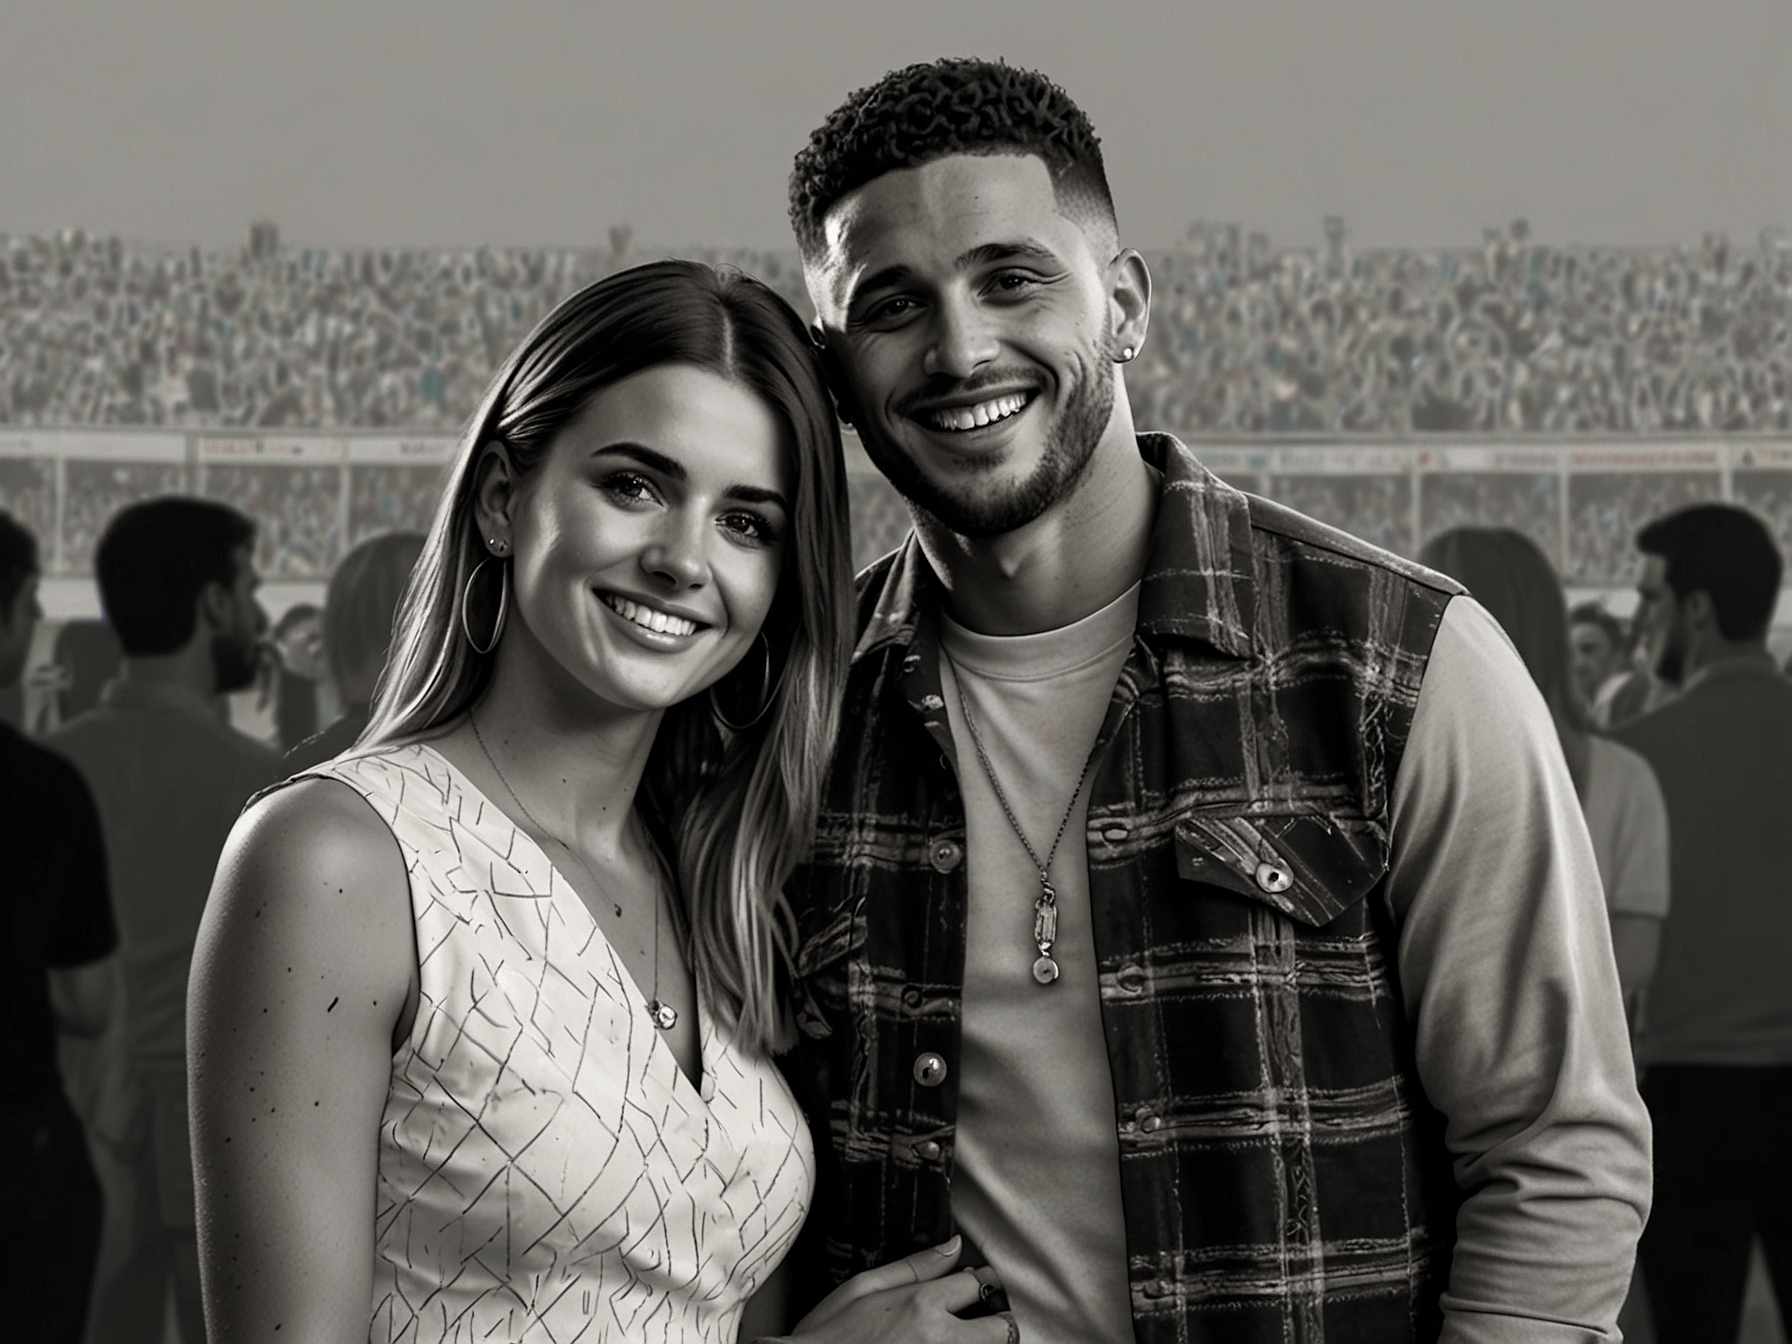 Kyle Walker and Annie Kilner pictured together at a public event, symbolizing their tumultuous but enduring relationship amid the backdrop of his football career.